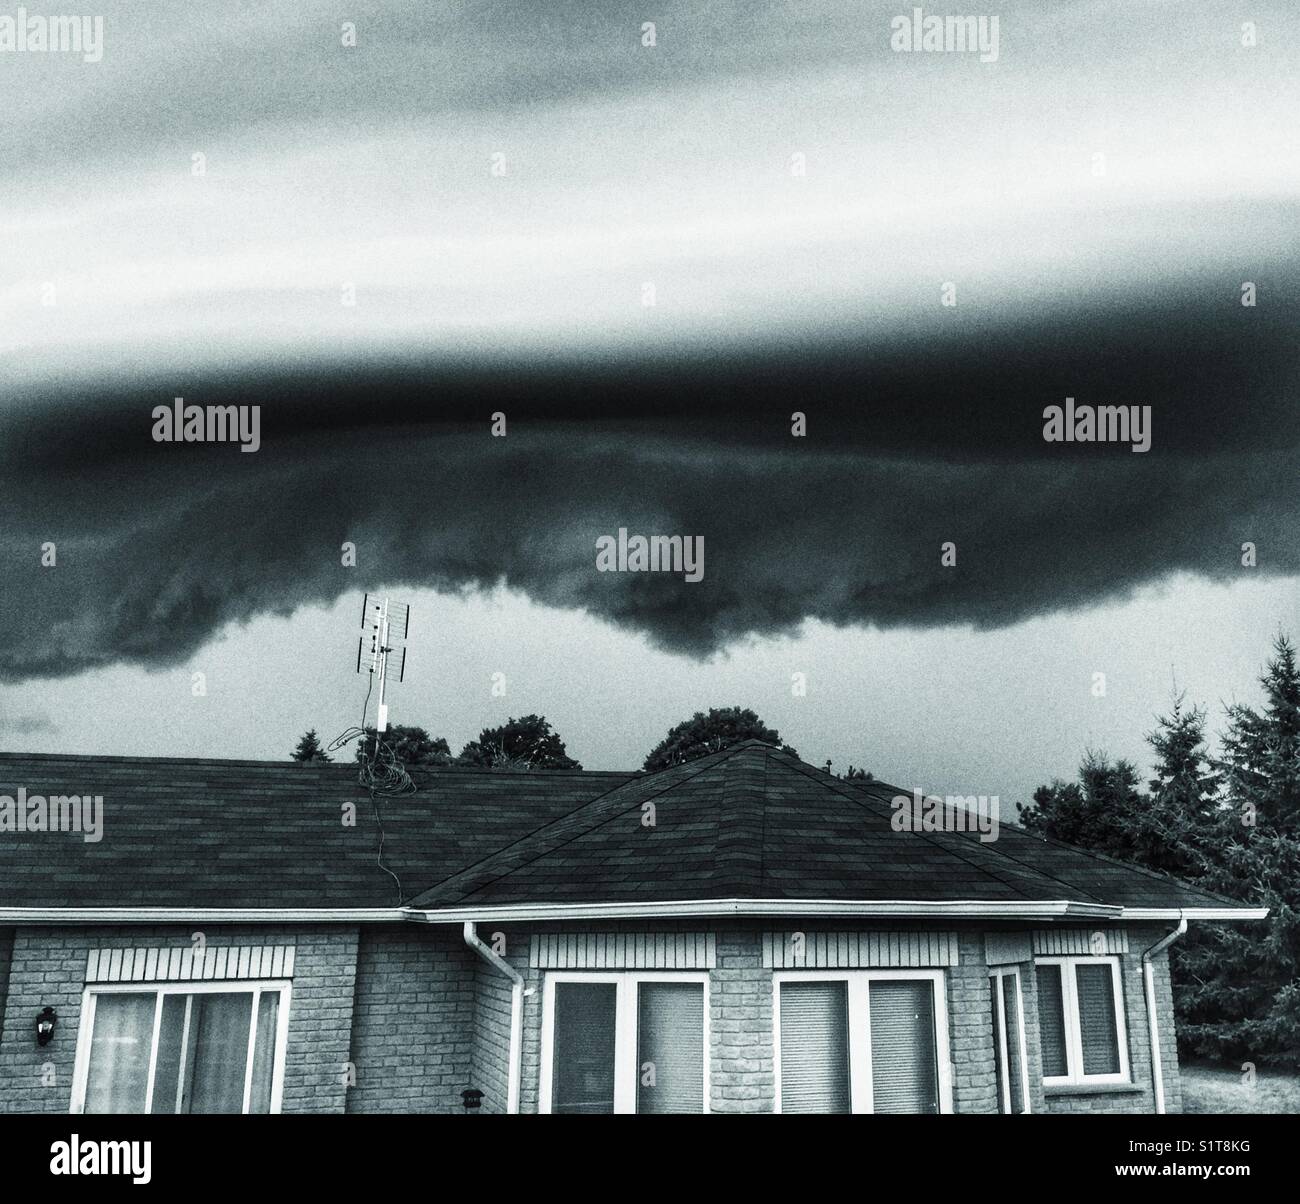 Ominous looking storm with a shelf cloud being viewed above a house in Clarington, Ontario, Canada Stock Photo